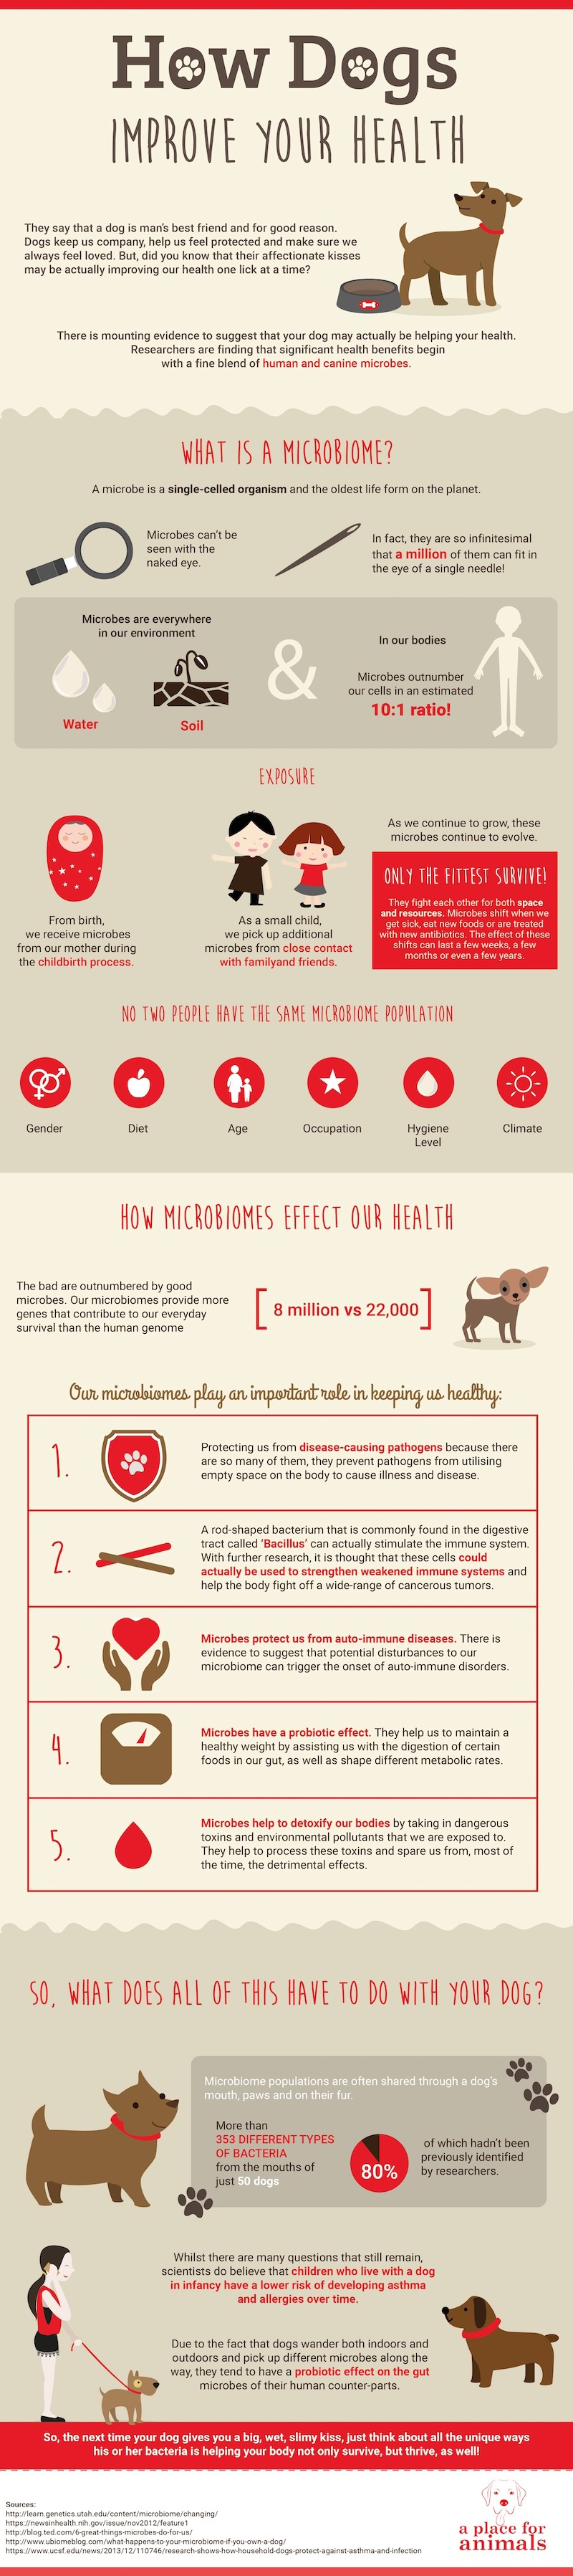 How Dogs Improve Your Health Infographic